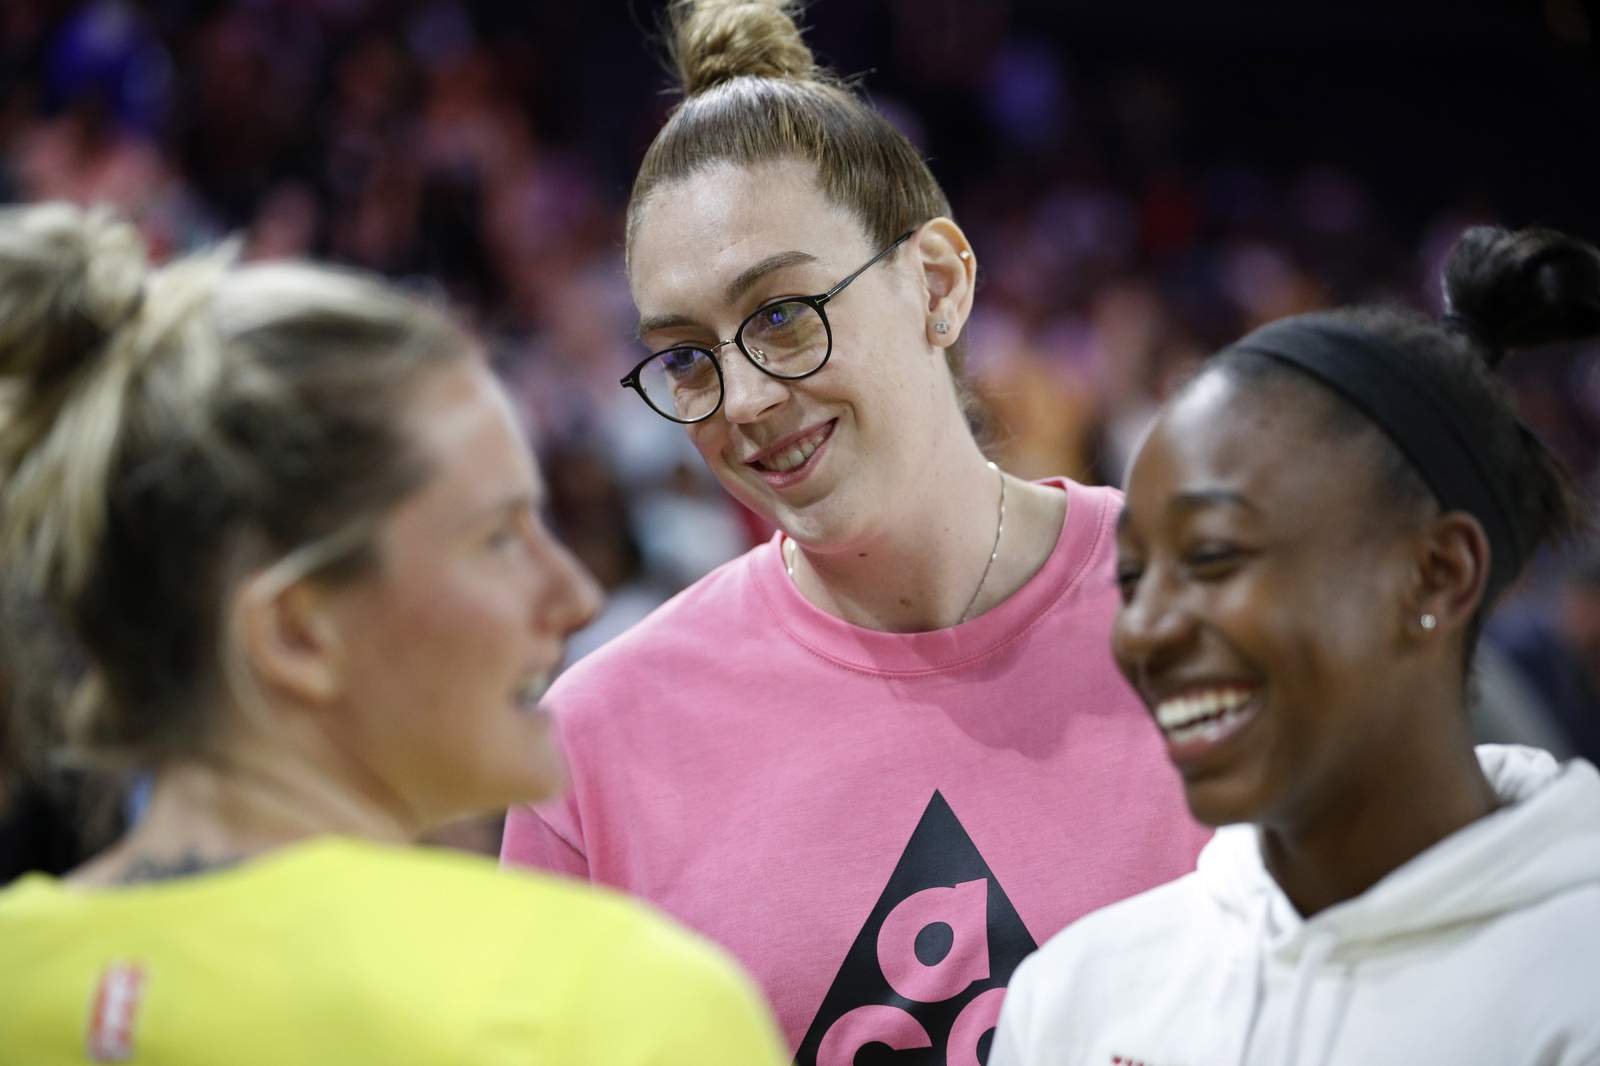 WNBA players adjusting to life in their Florida bubble